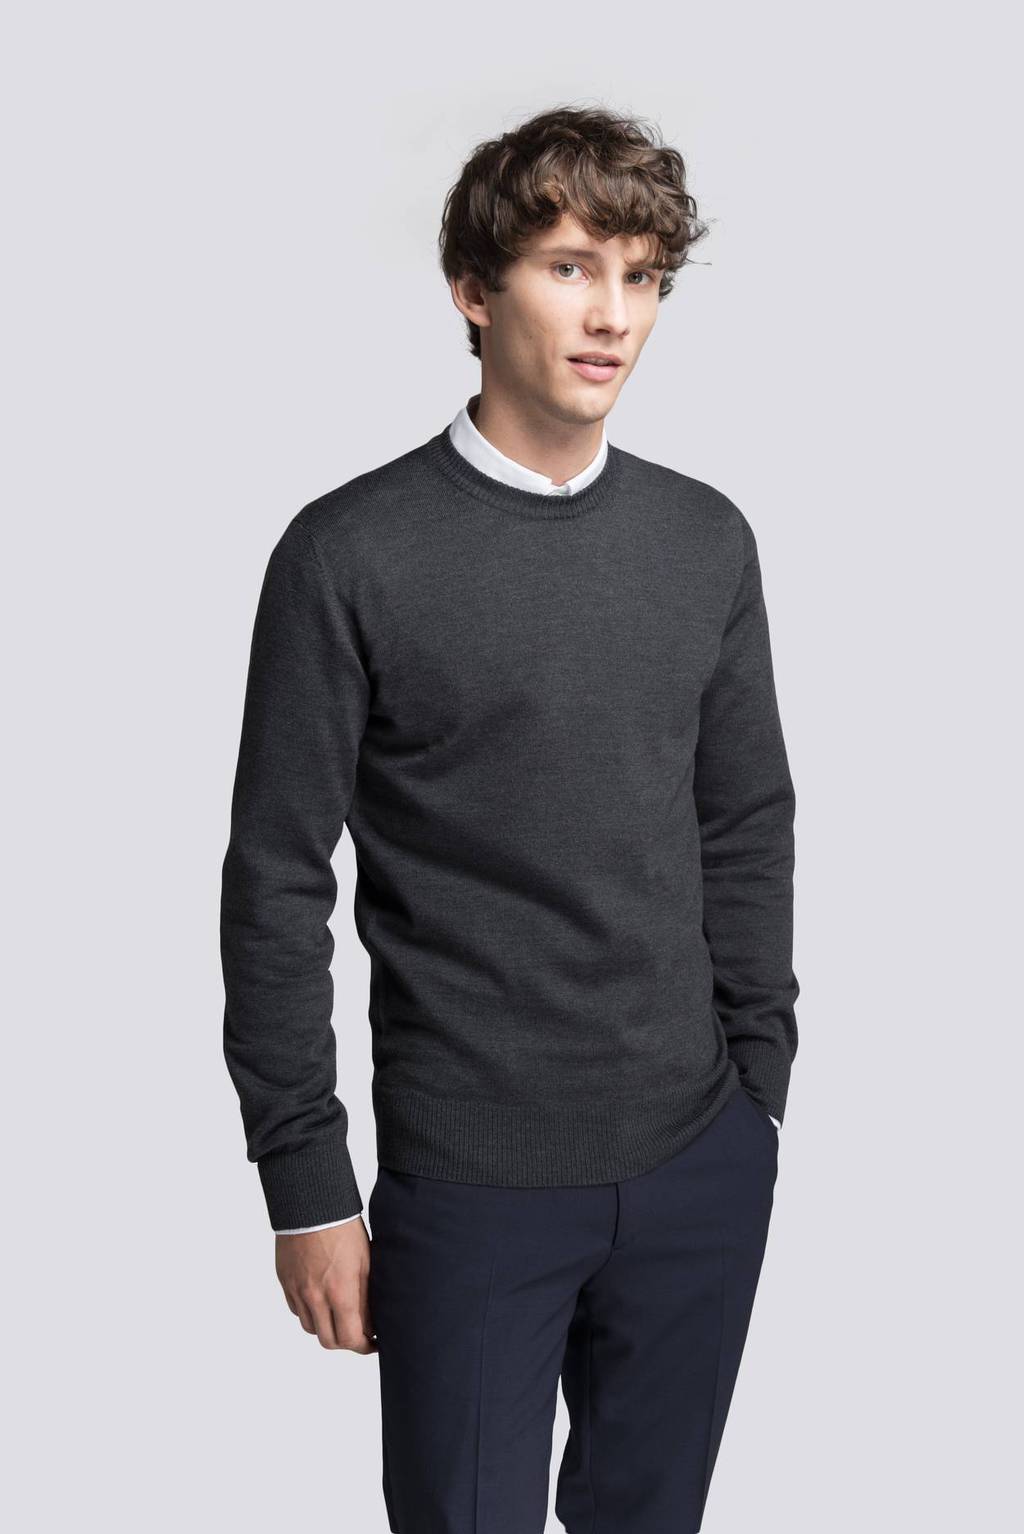 The Best Sustainable and Ethical Sweaters for Men | Eco-Stylist